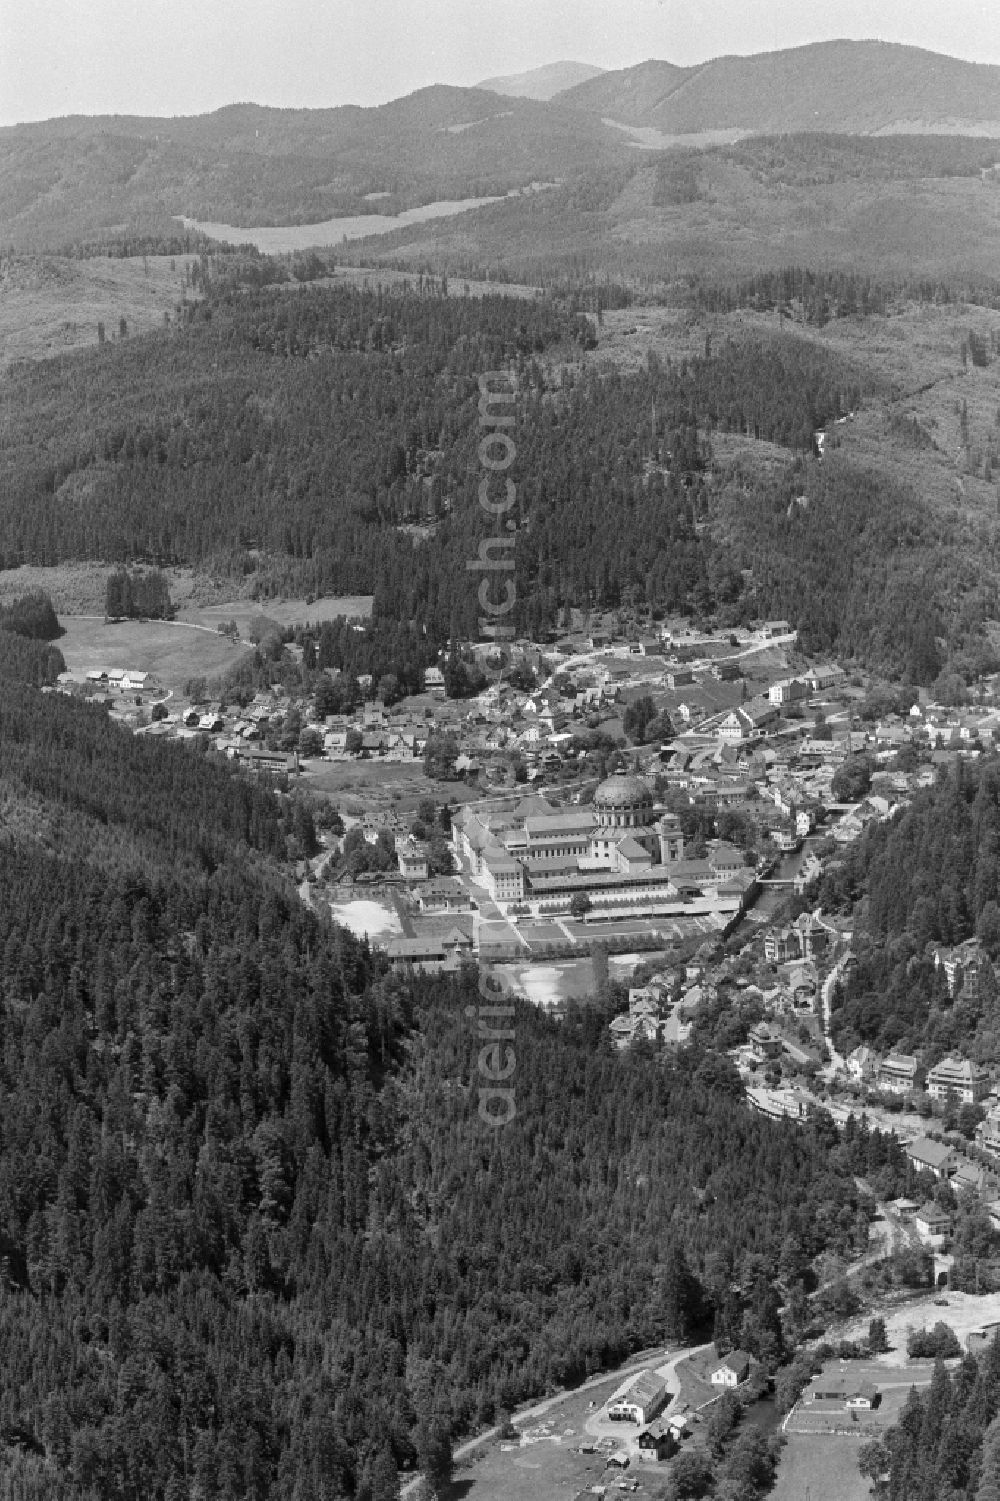 Aerial photograph Sankt Blasien - Complex of buildings of the monastery Kolleg in Sankt Blasien in the Black Forest in the state Baden-Wuerttemberg, Germany